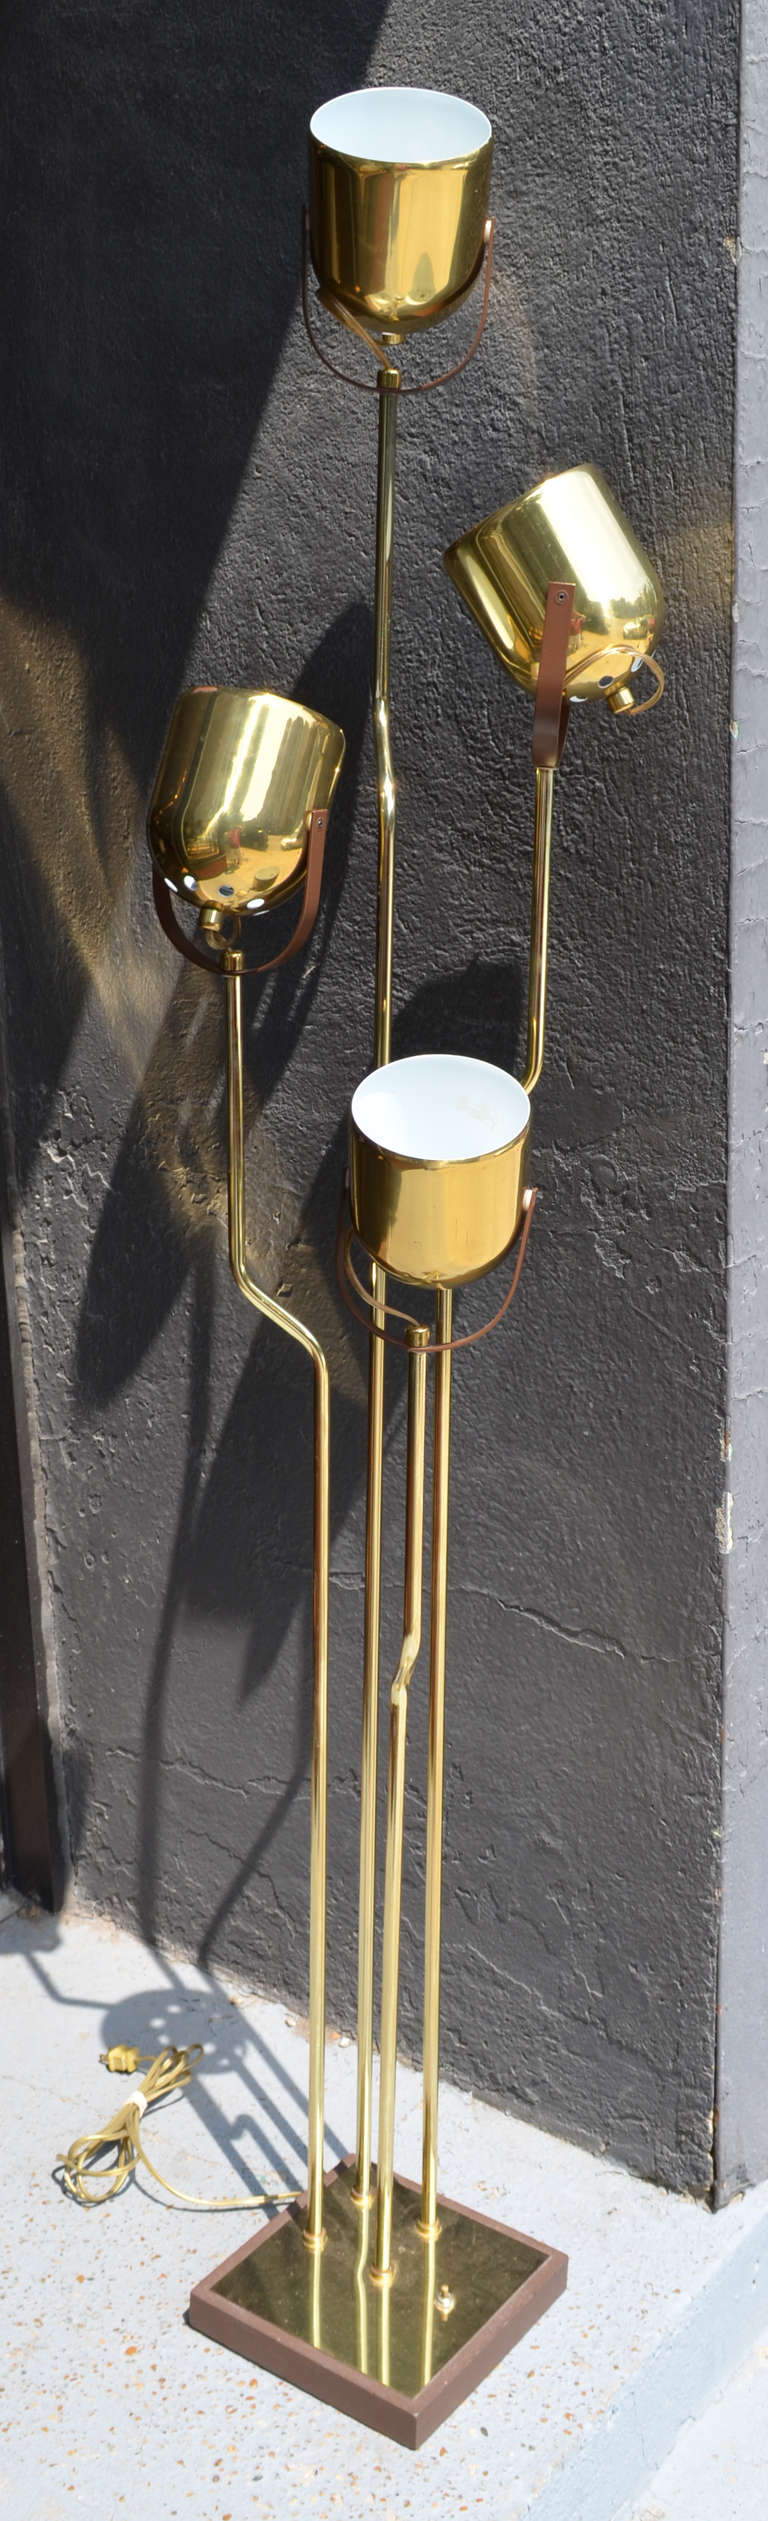 A four arm brass floor lamp . The arms are various hights surmounted by adjustable brass pendant adjustable domes. The adjustable domes make for great reading ,accent or ambient lighting. Highly versatile lamp.